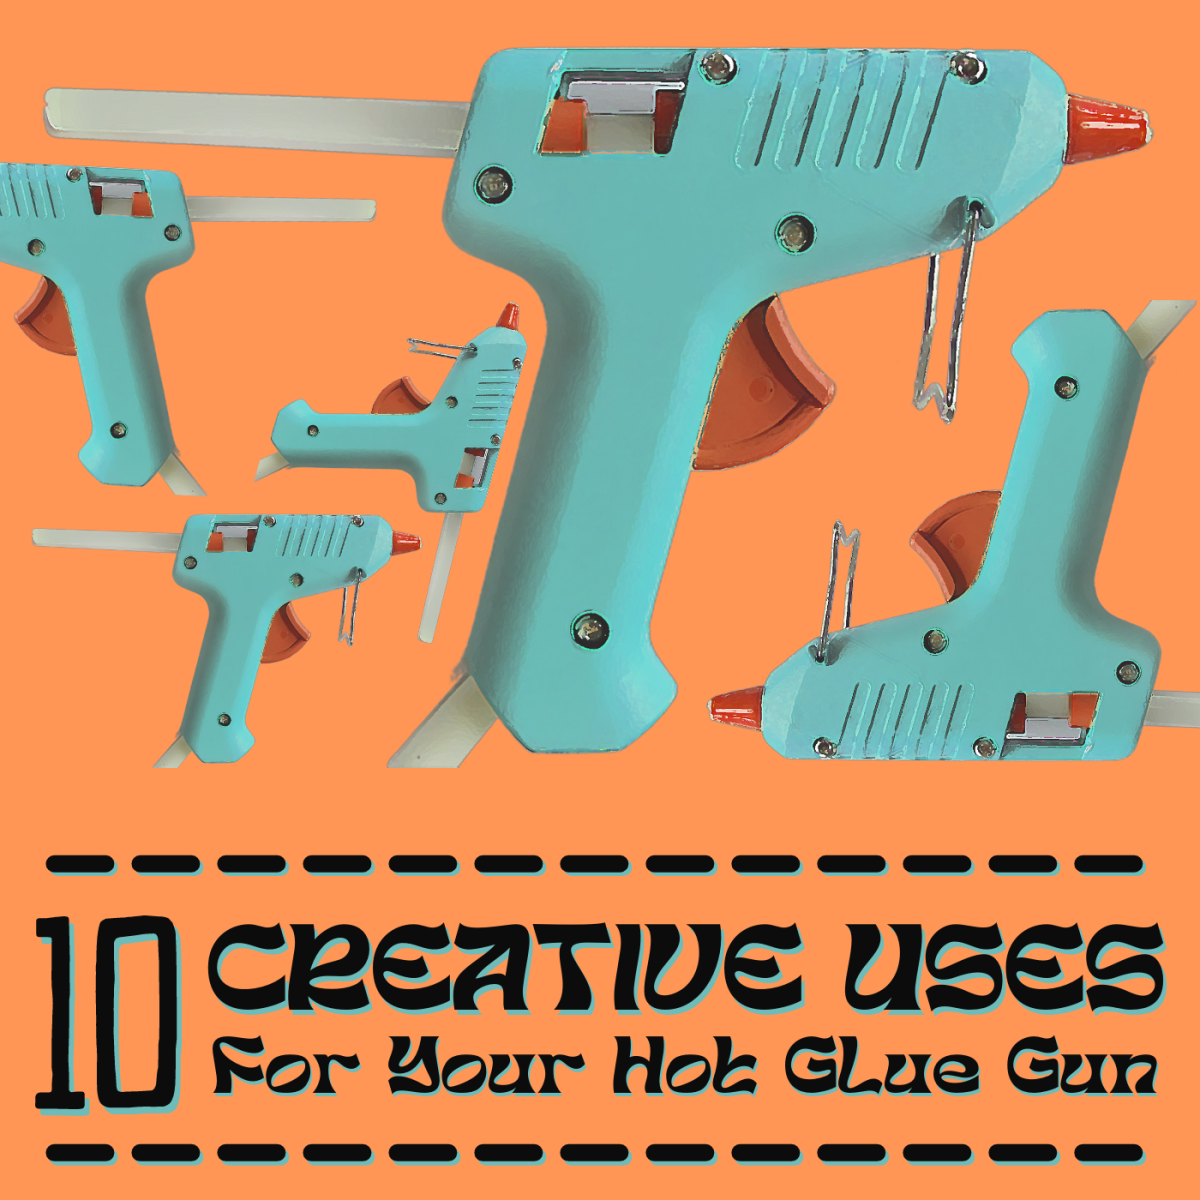 https://images.saymedia-content.com/.image/t_share/MTgwNDM5MTMwNjg0MDA4MzAw/ten-genius-things-you-can-do-with-a-glue-gun.png